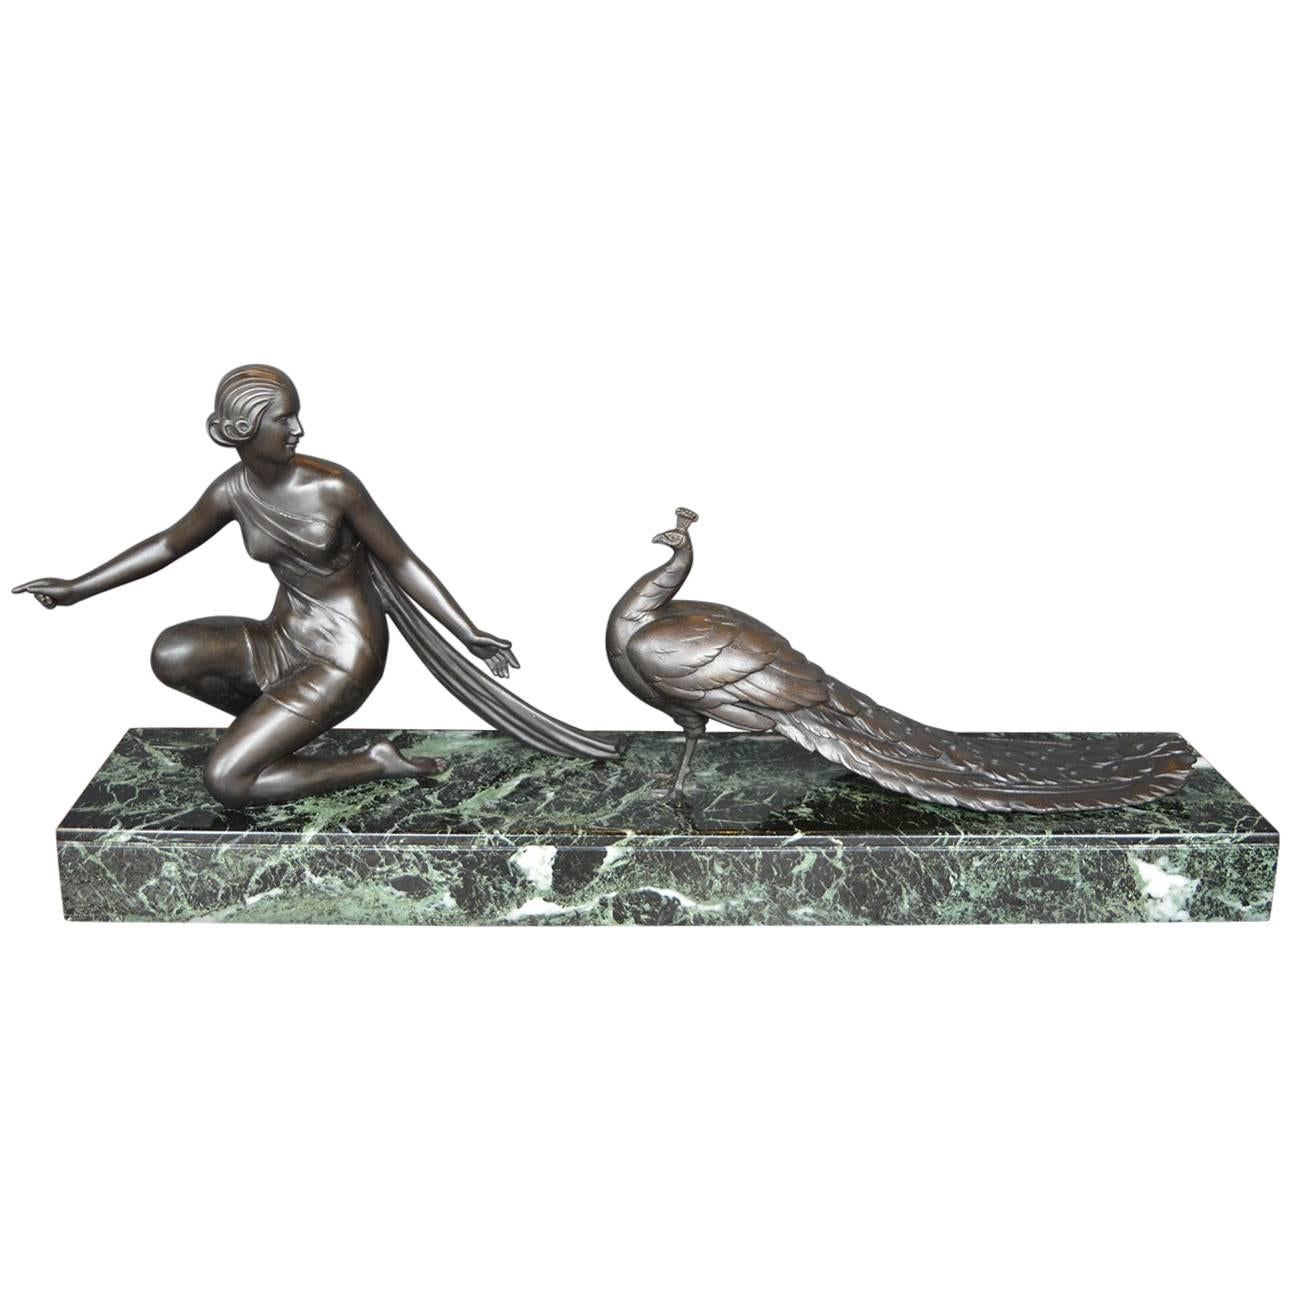 Alexandre Ouline Sculpture of a Woman with a Peacock For Sale